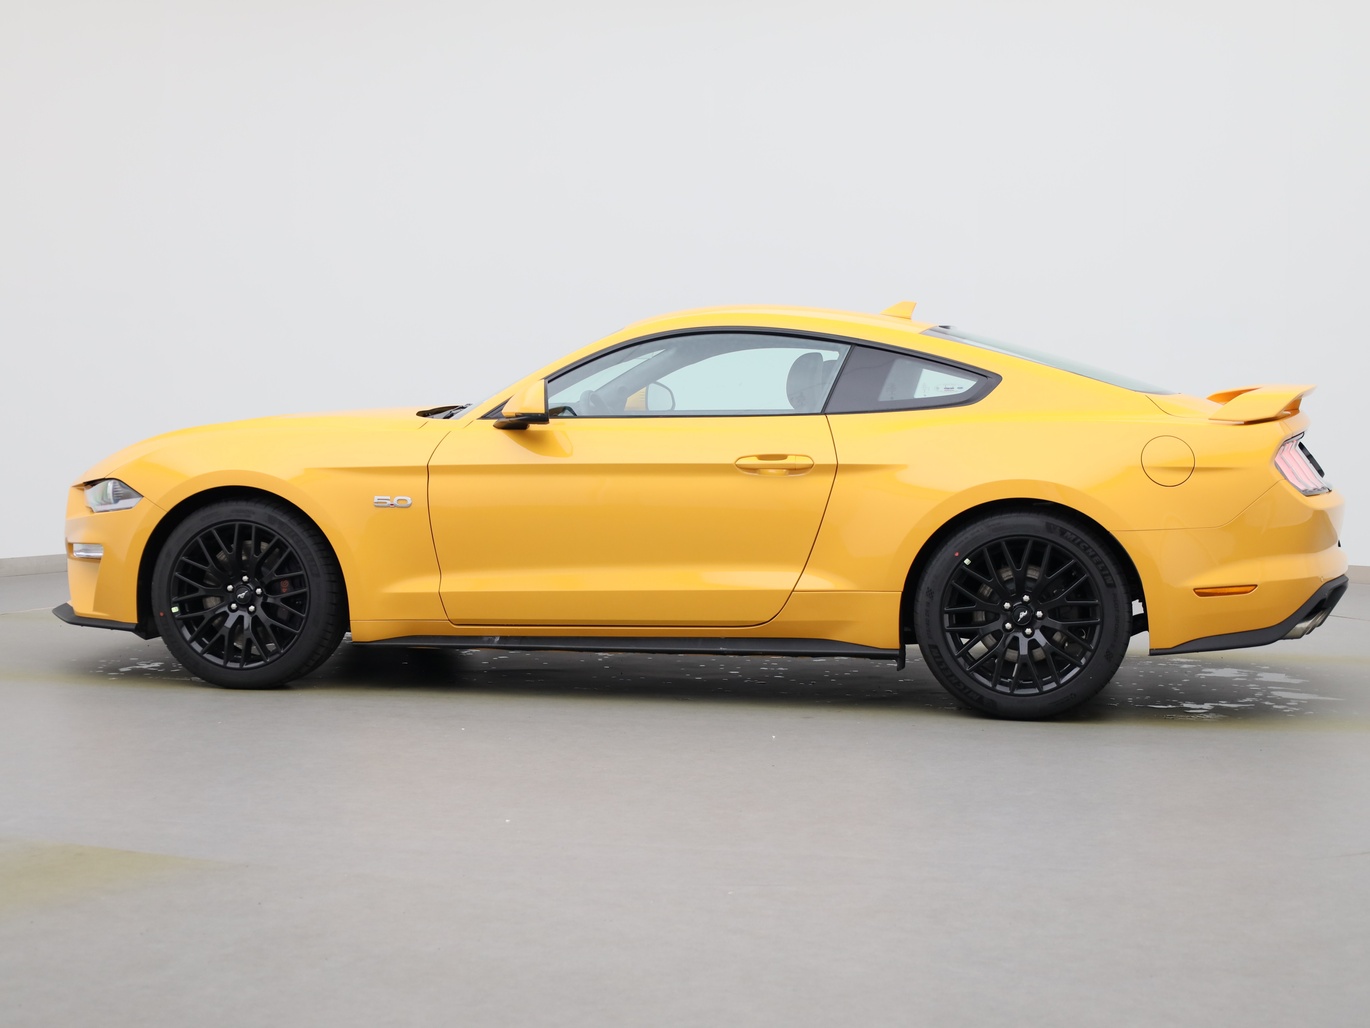  Ford Mustang GT Coupé V8 450PS / Premium 2 / Magne in Cyber Orange von Links